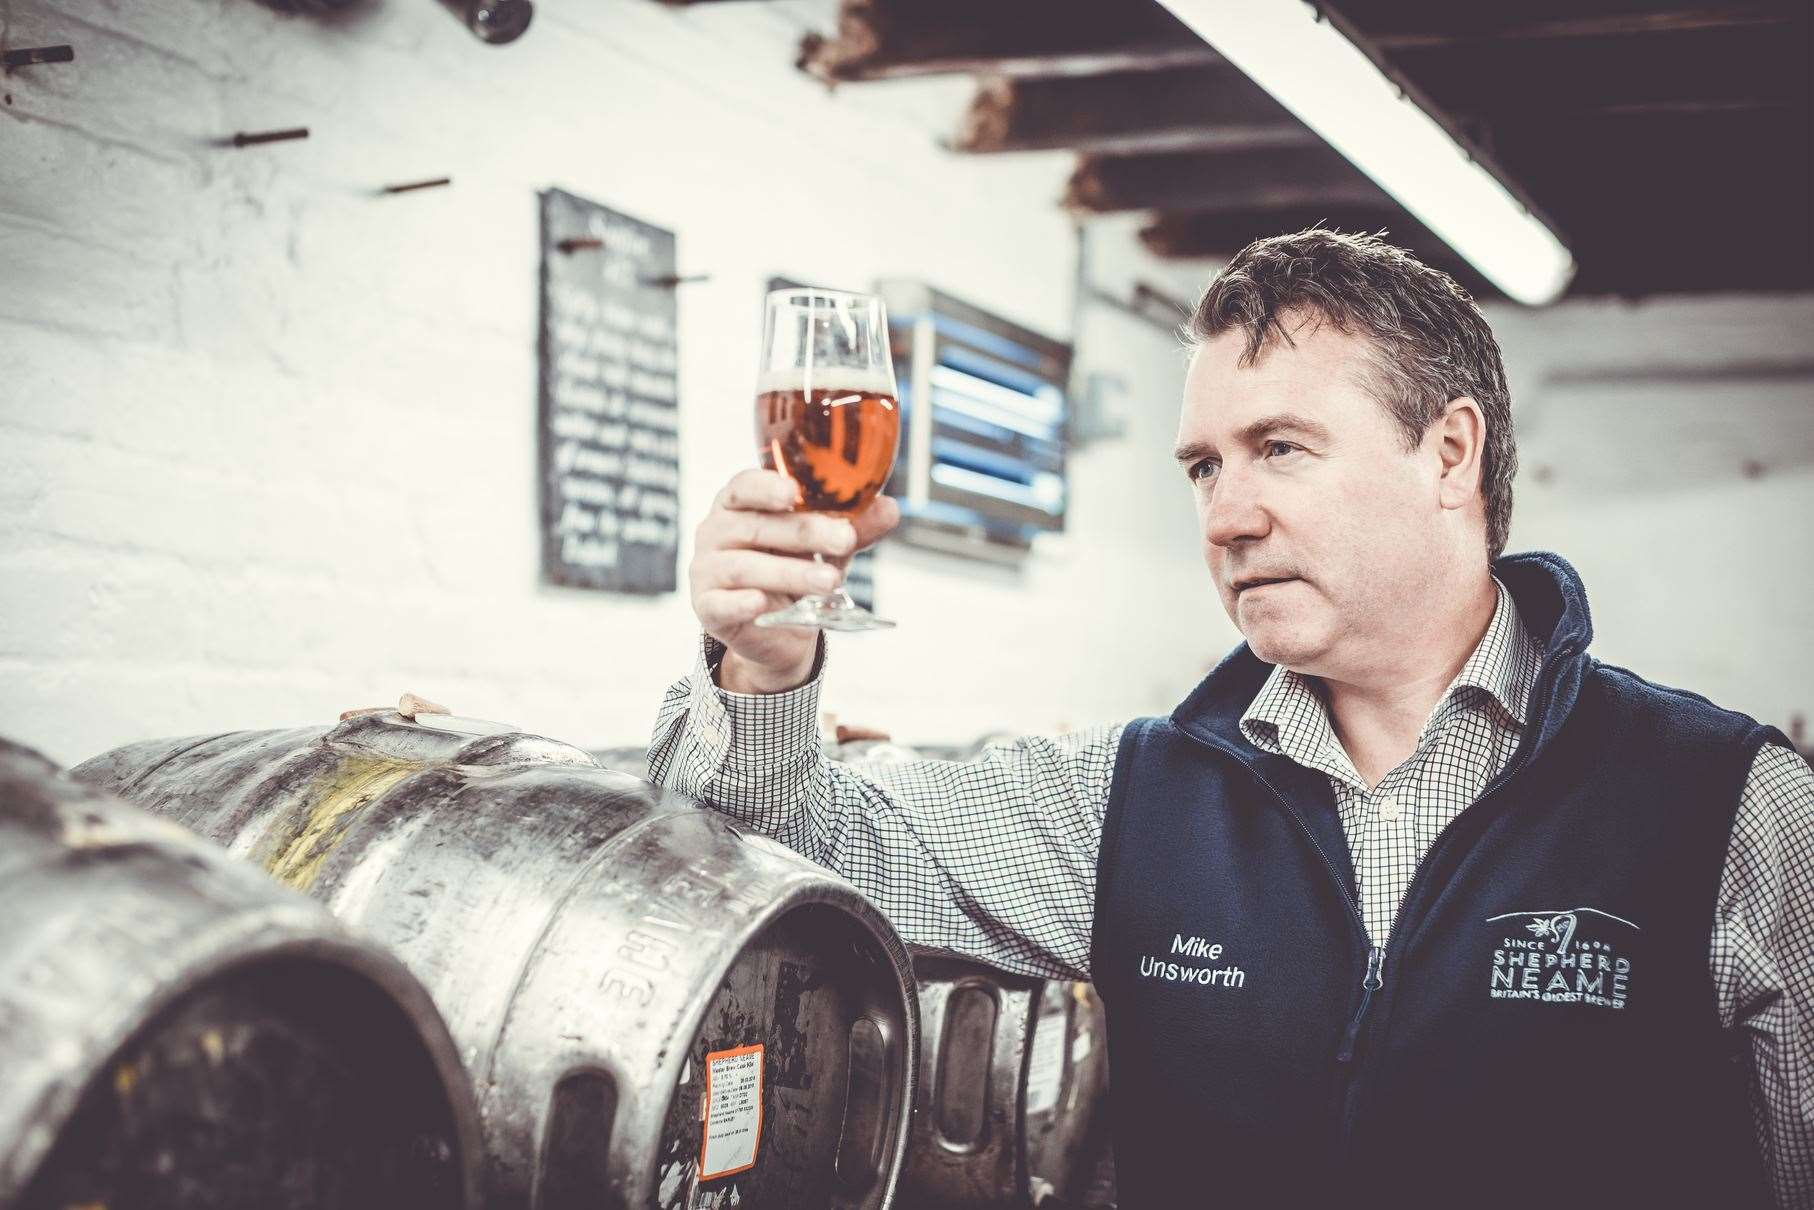 Shepherd Neame's head brewer, Mike Unsworth